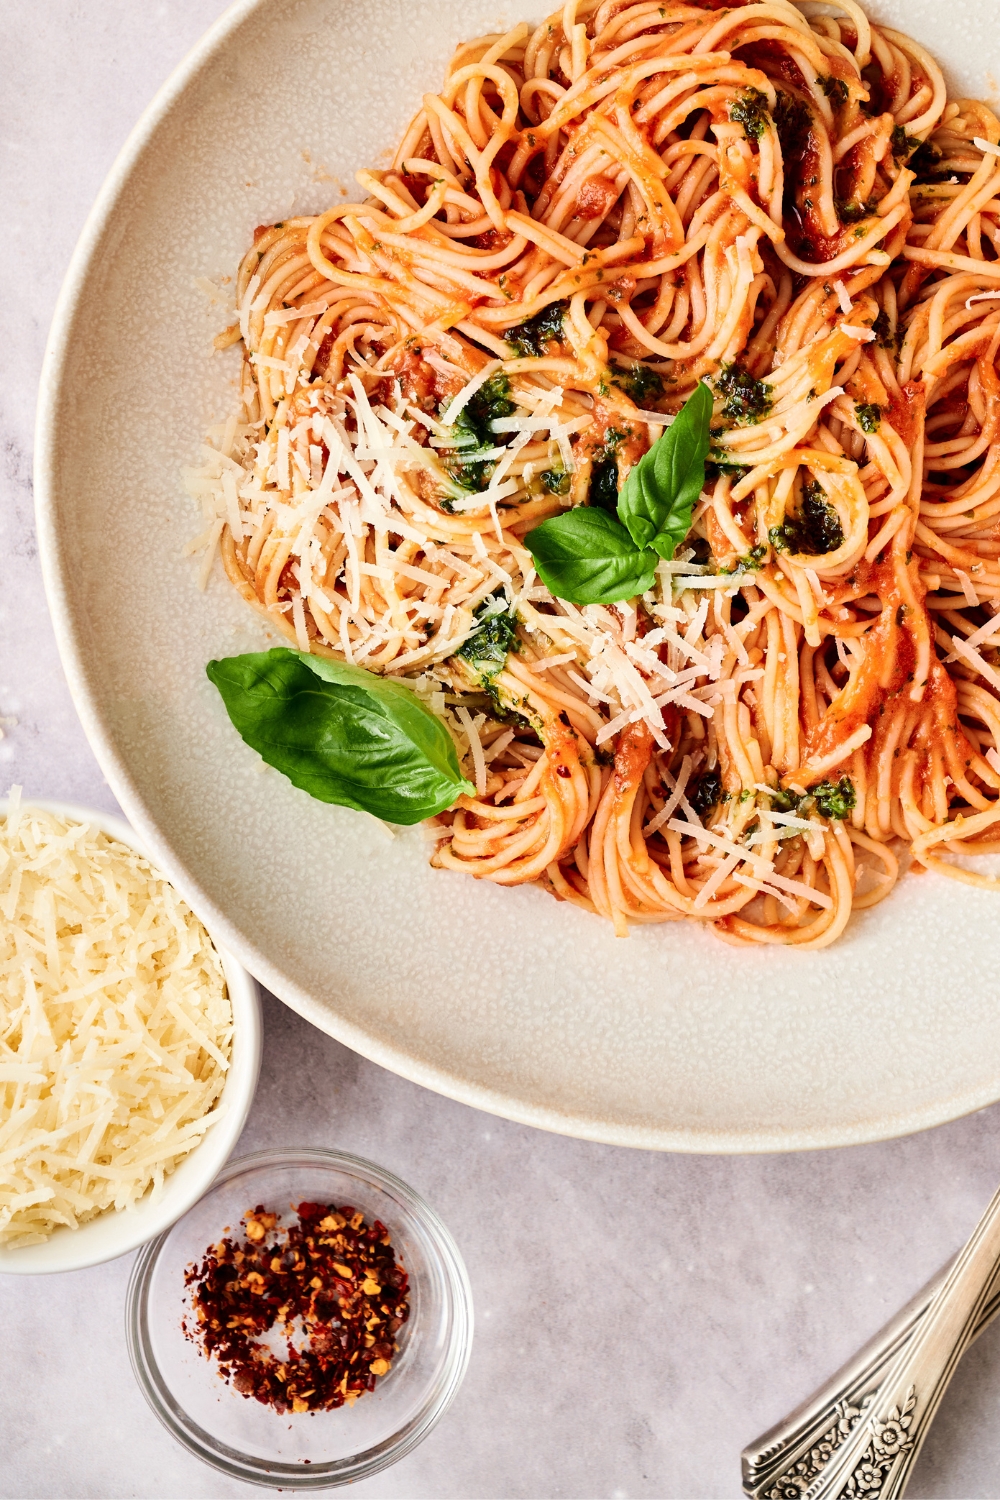 Spaghetti pomodoro in a white bowl garnished with basil and cheese.